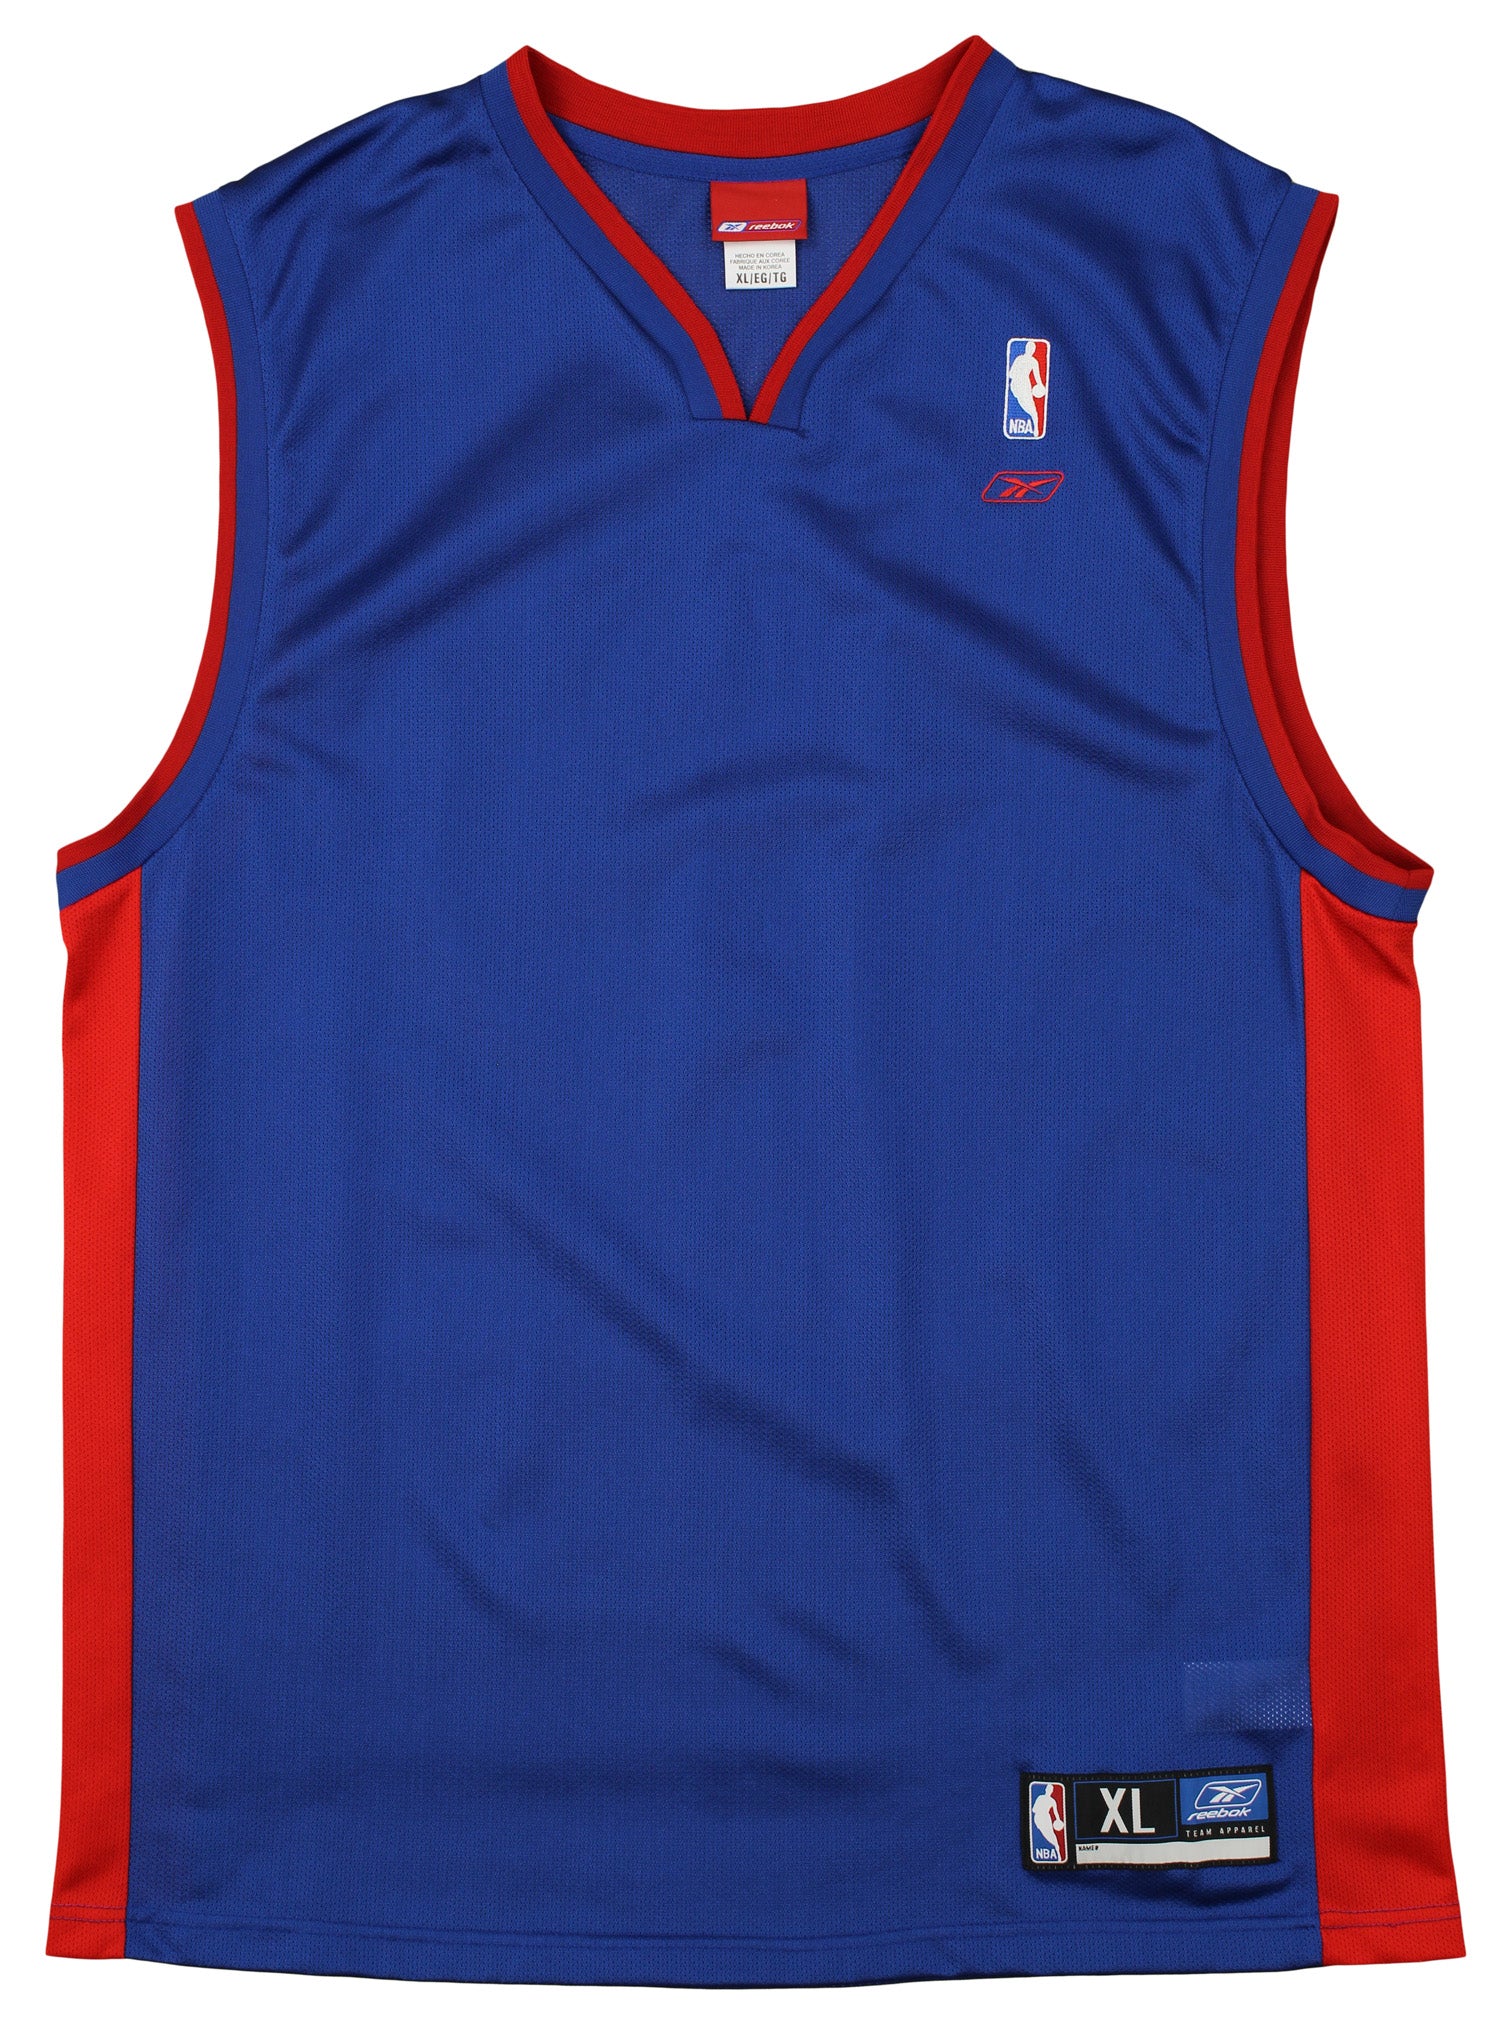 los angeles clippers women's apparel